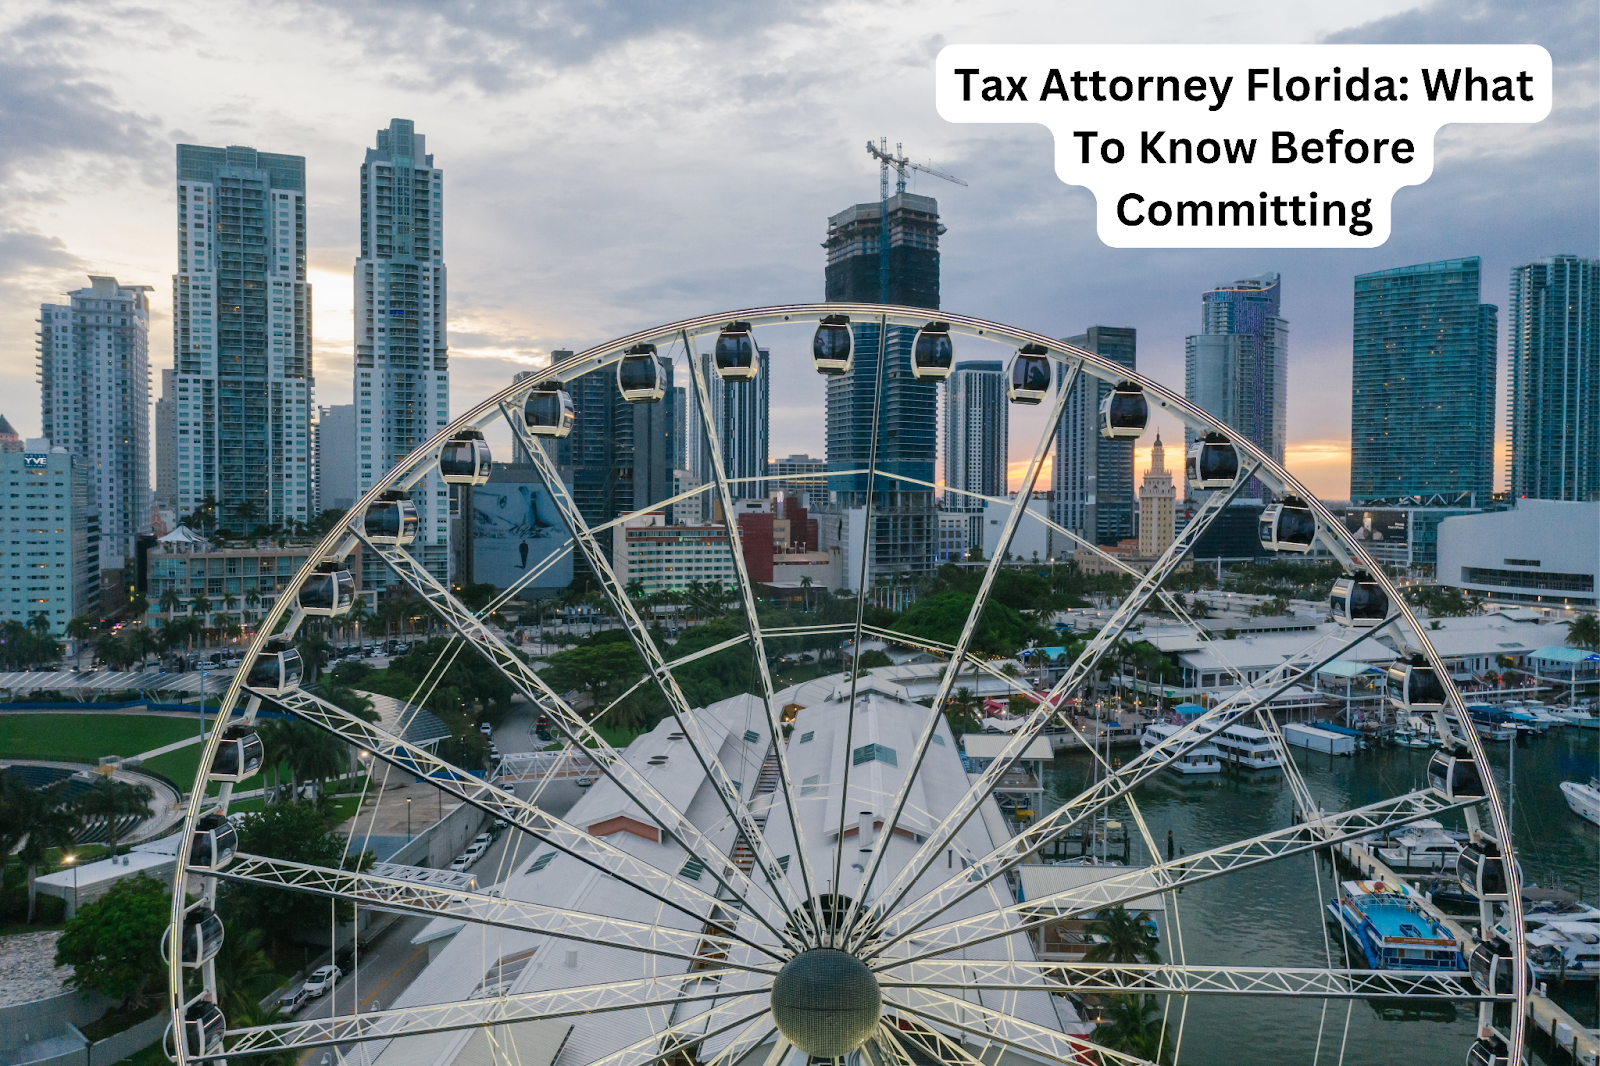 Tax Attorney Florida: What To Know Before Committing